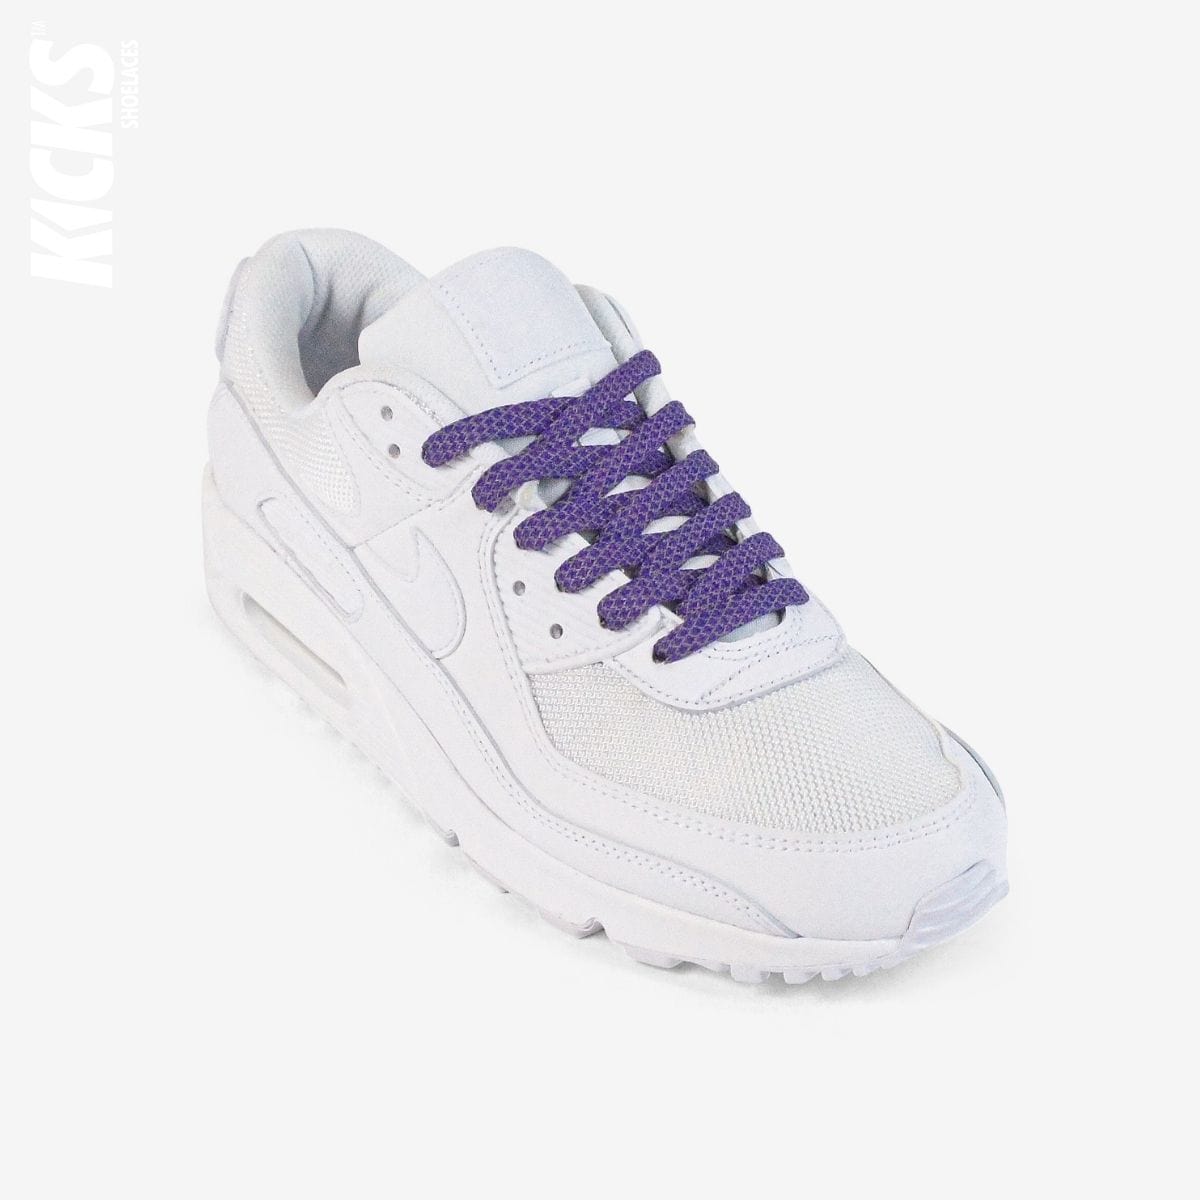 purple-reflective-colored-shoelaces-on-white-sneakers